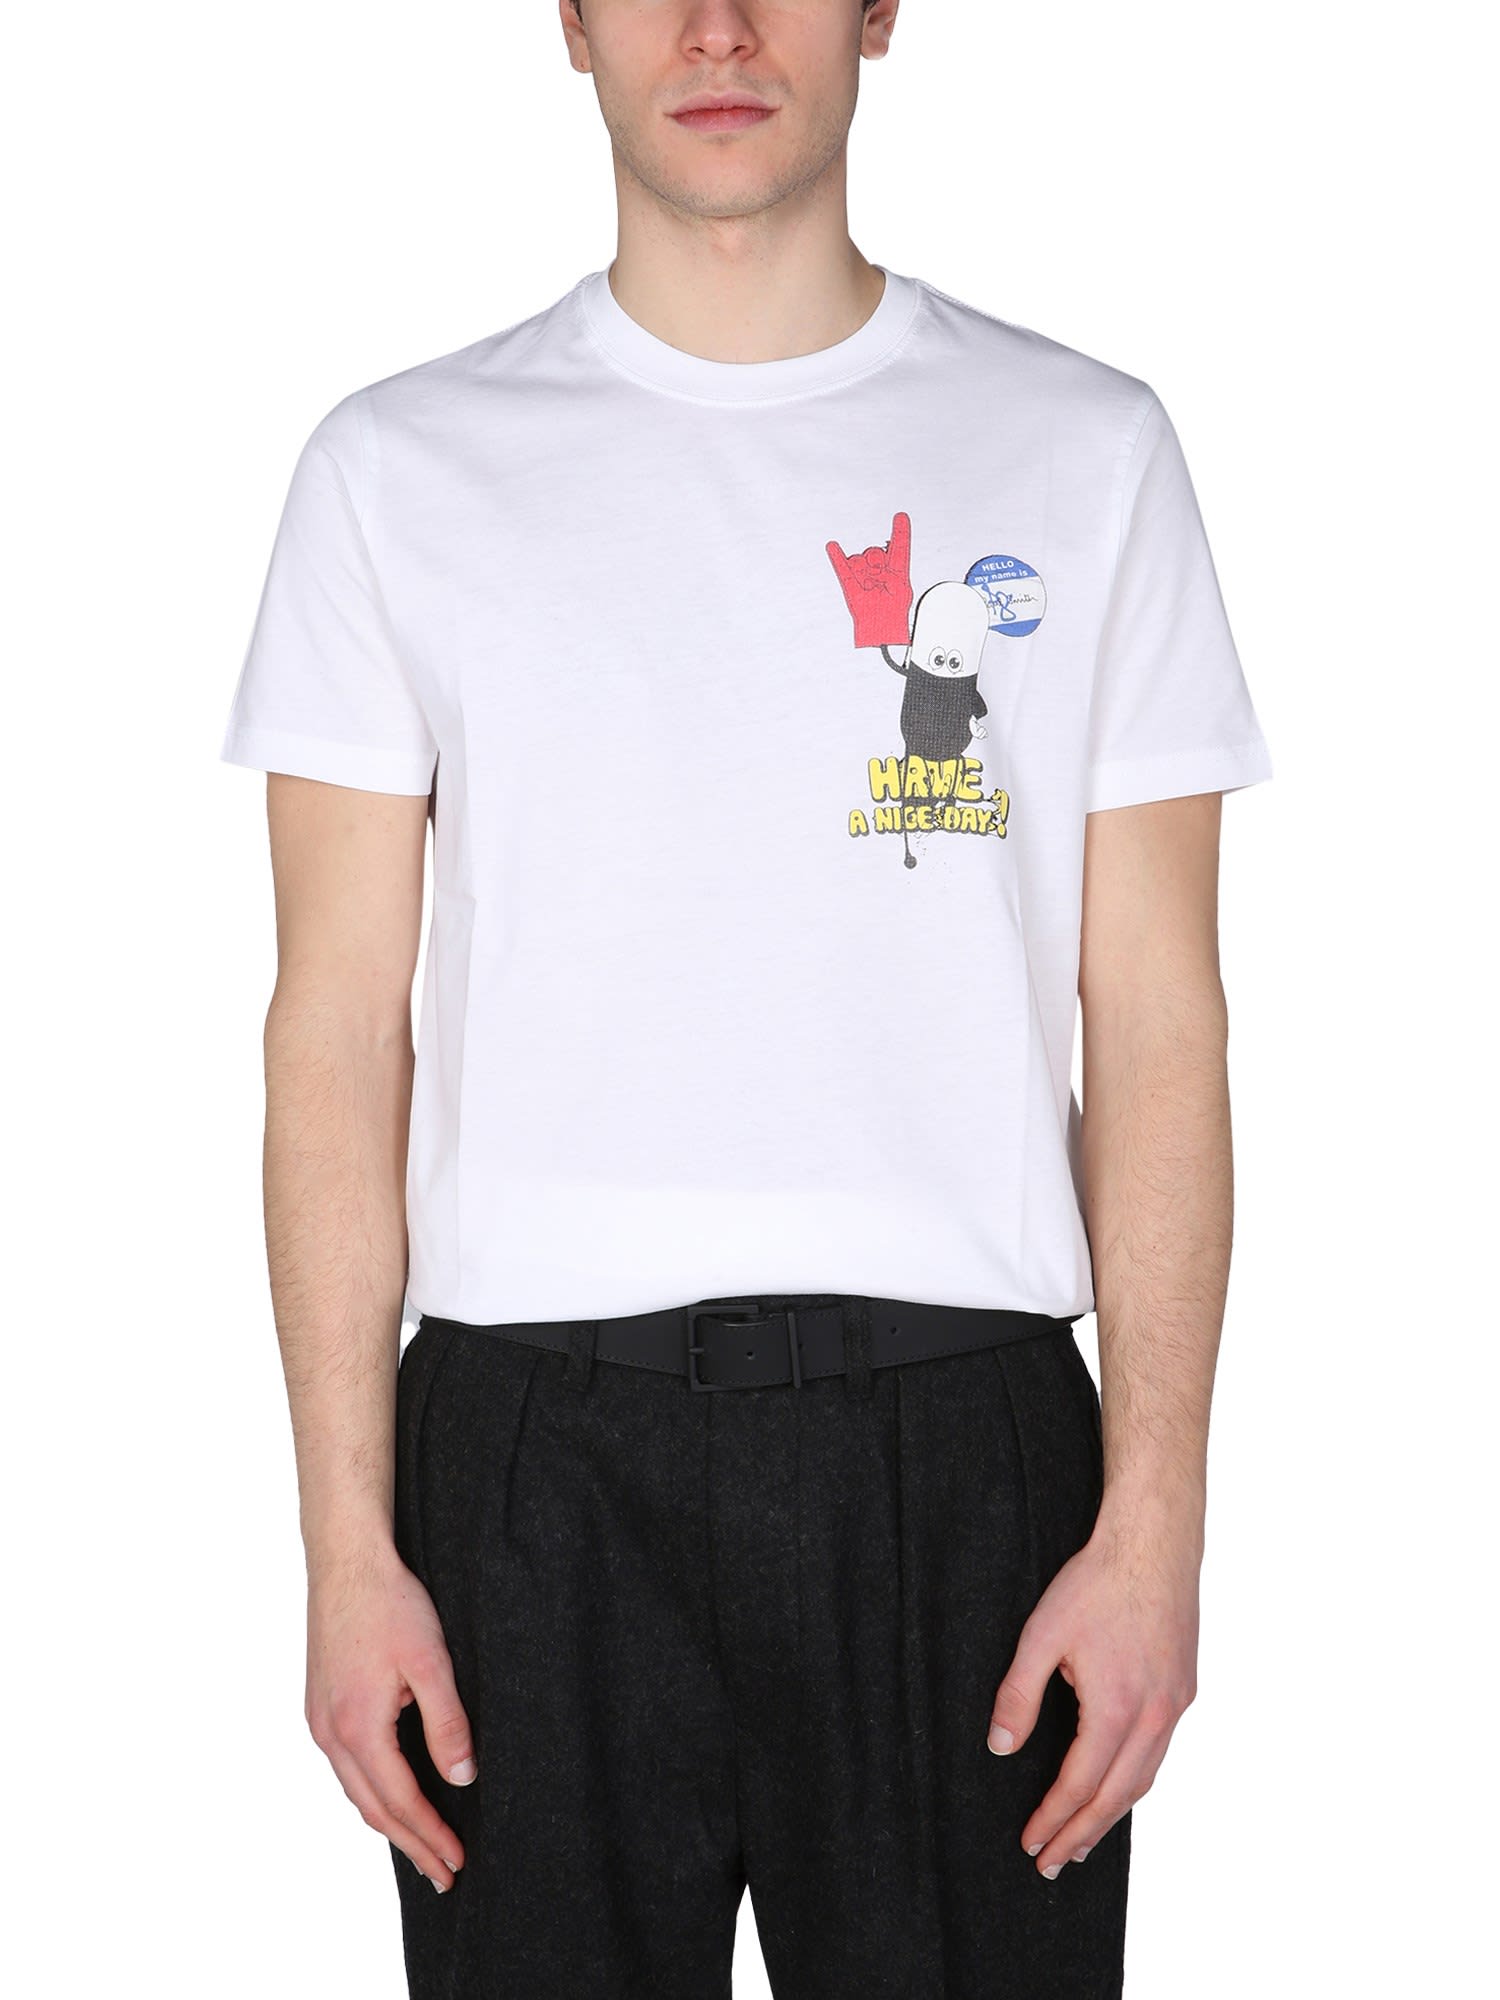 PS by Paul Smith Nice Day T-shirt